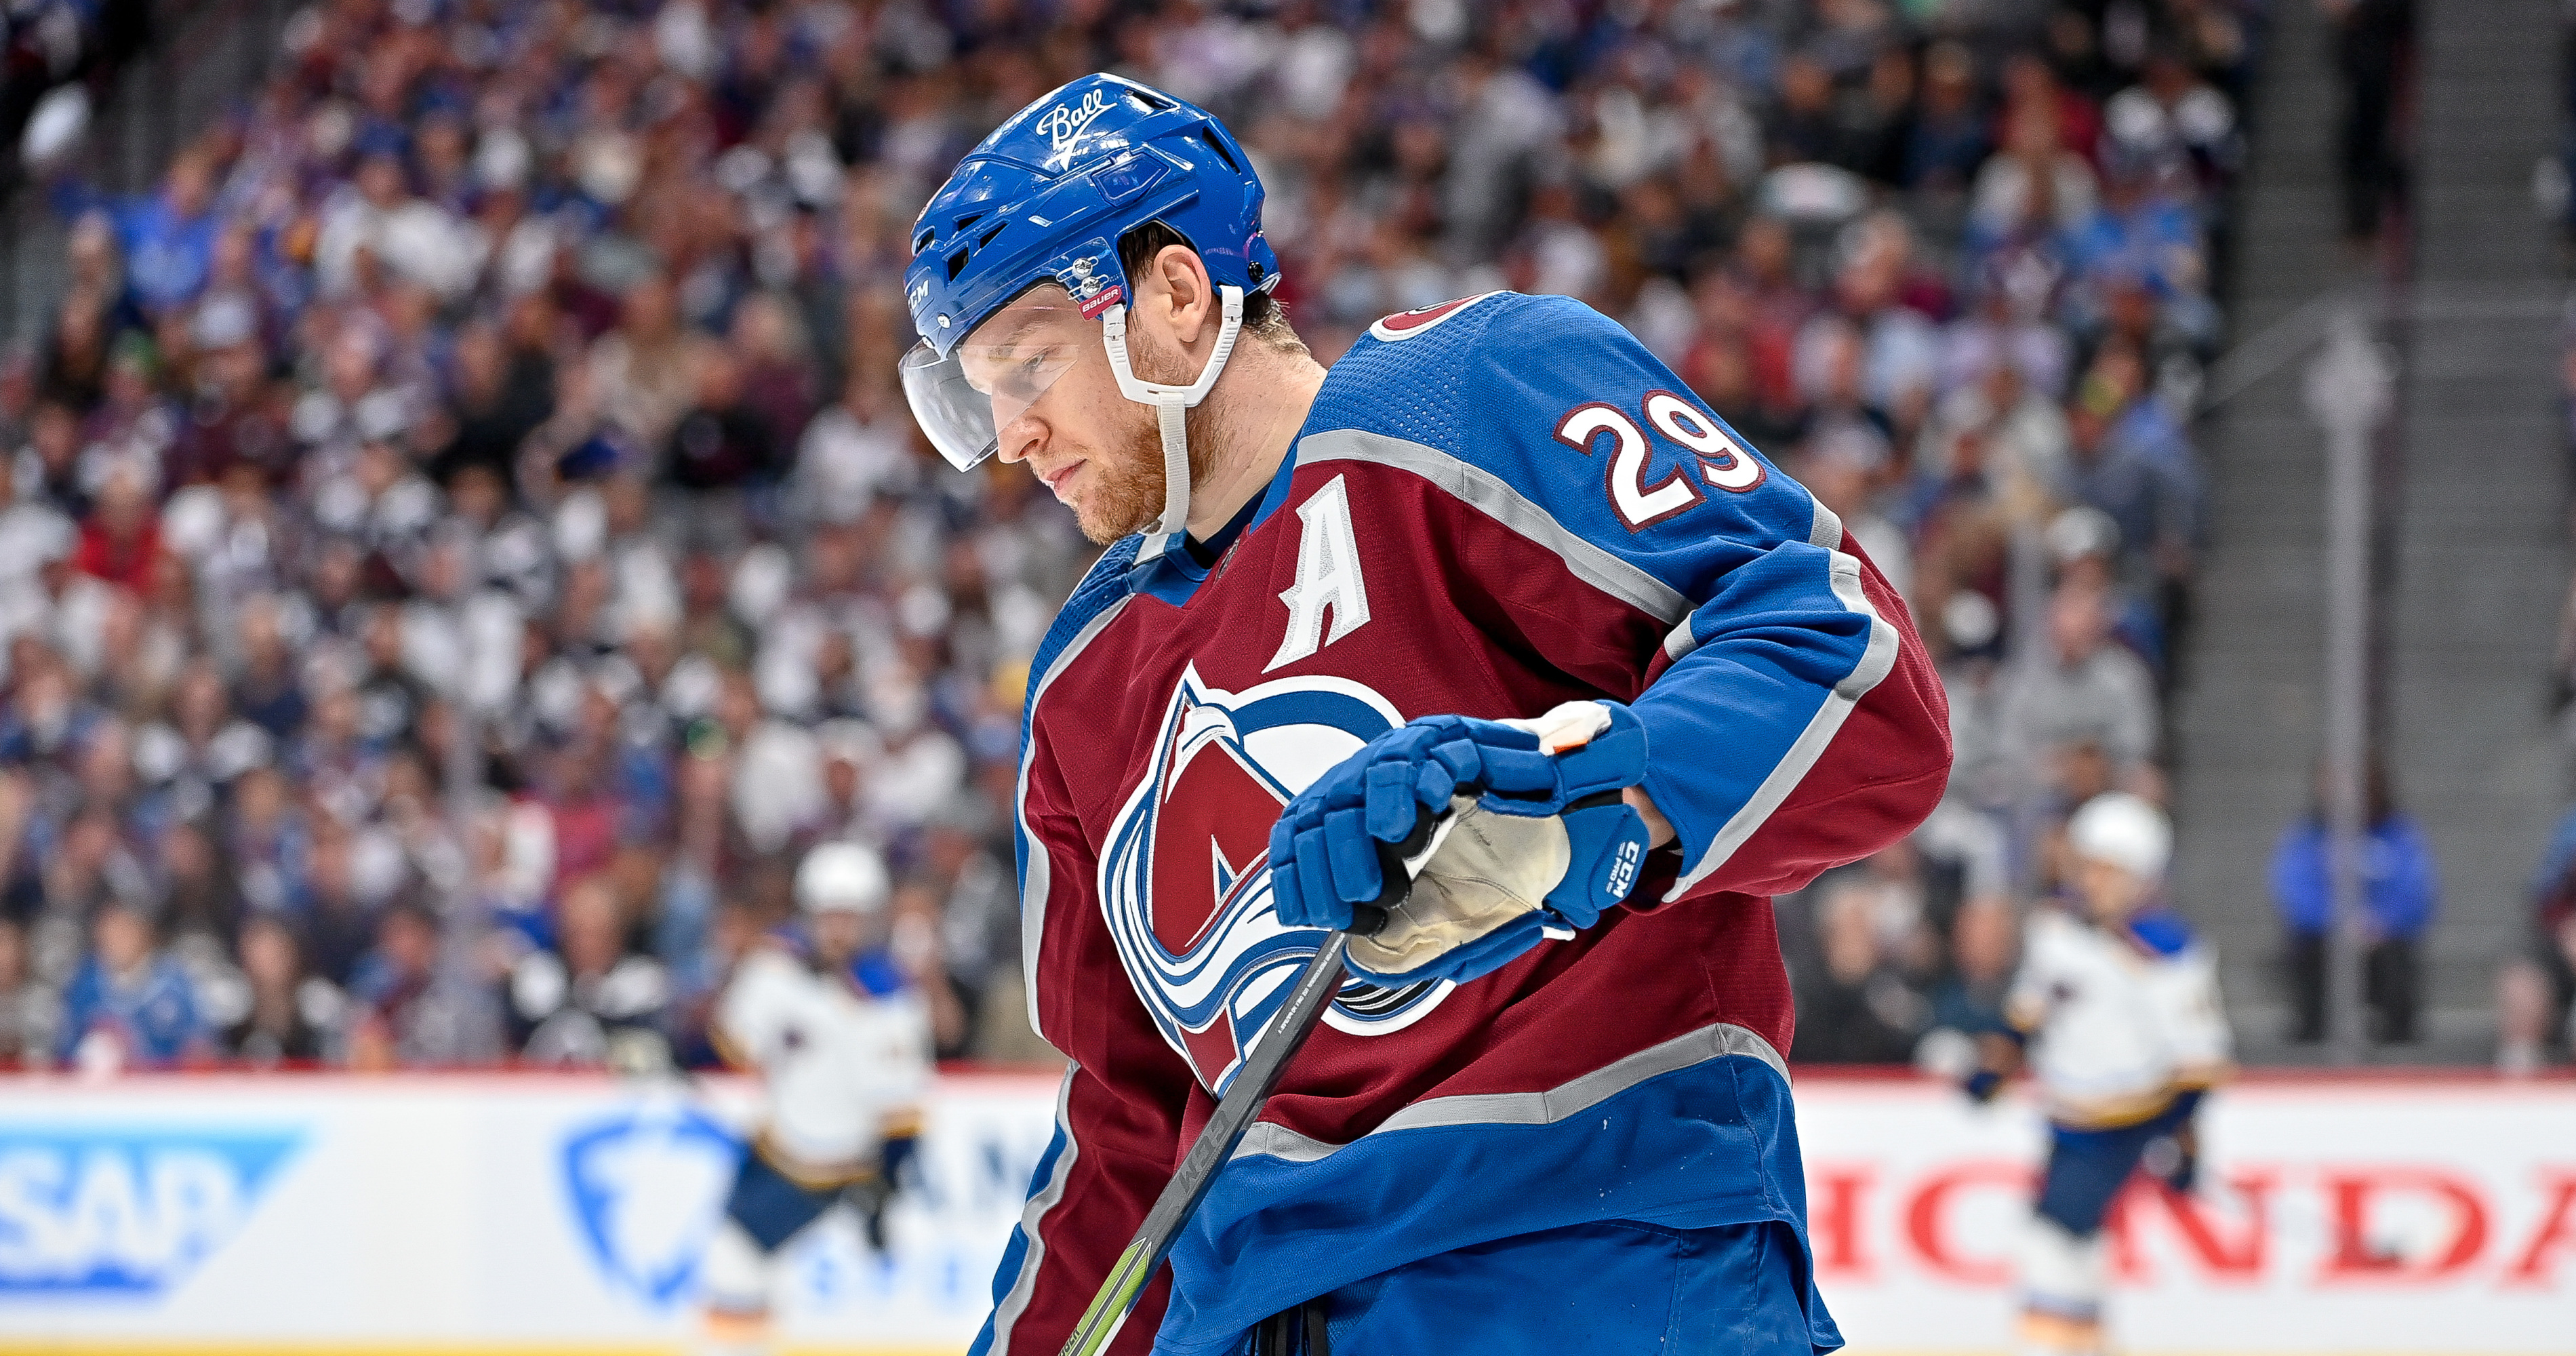 Colorado Avalanche vs St Louis Blues Series Turning In Colorado's Favour